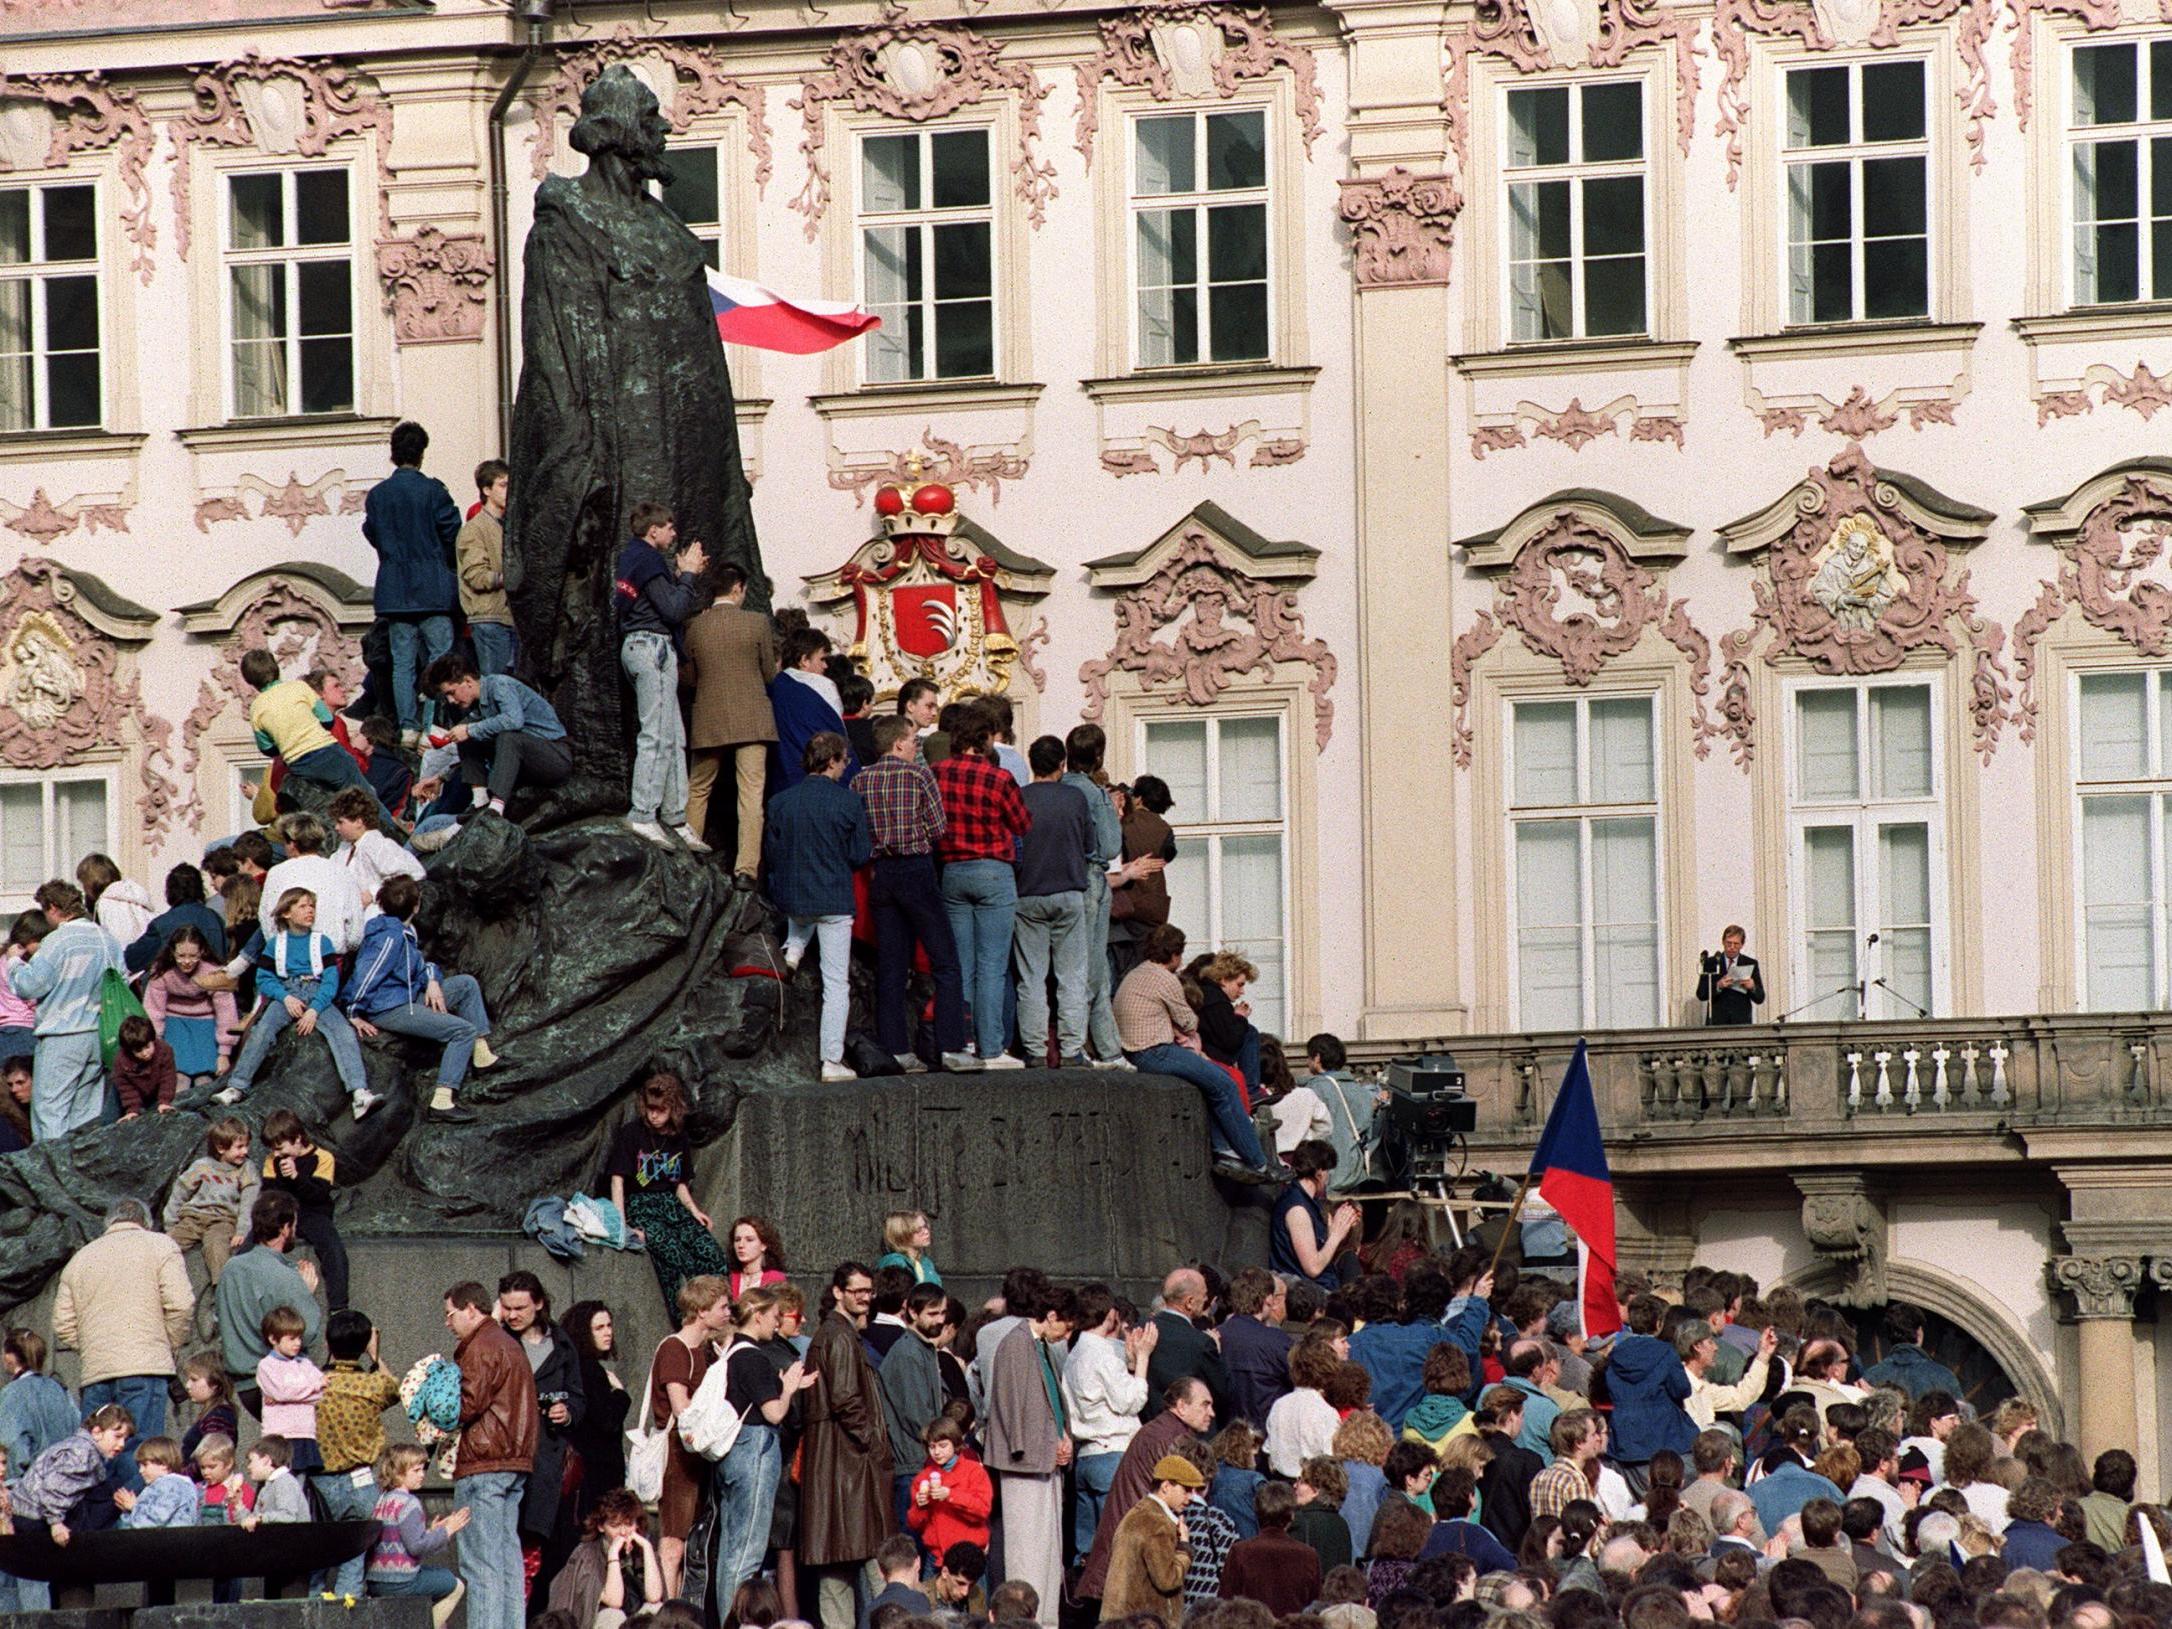 Vaclav Havel addresses supporters from the balcony of the Kinsky Palace at the Old City Square on 23 February 1990 in the wake of his victory